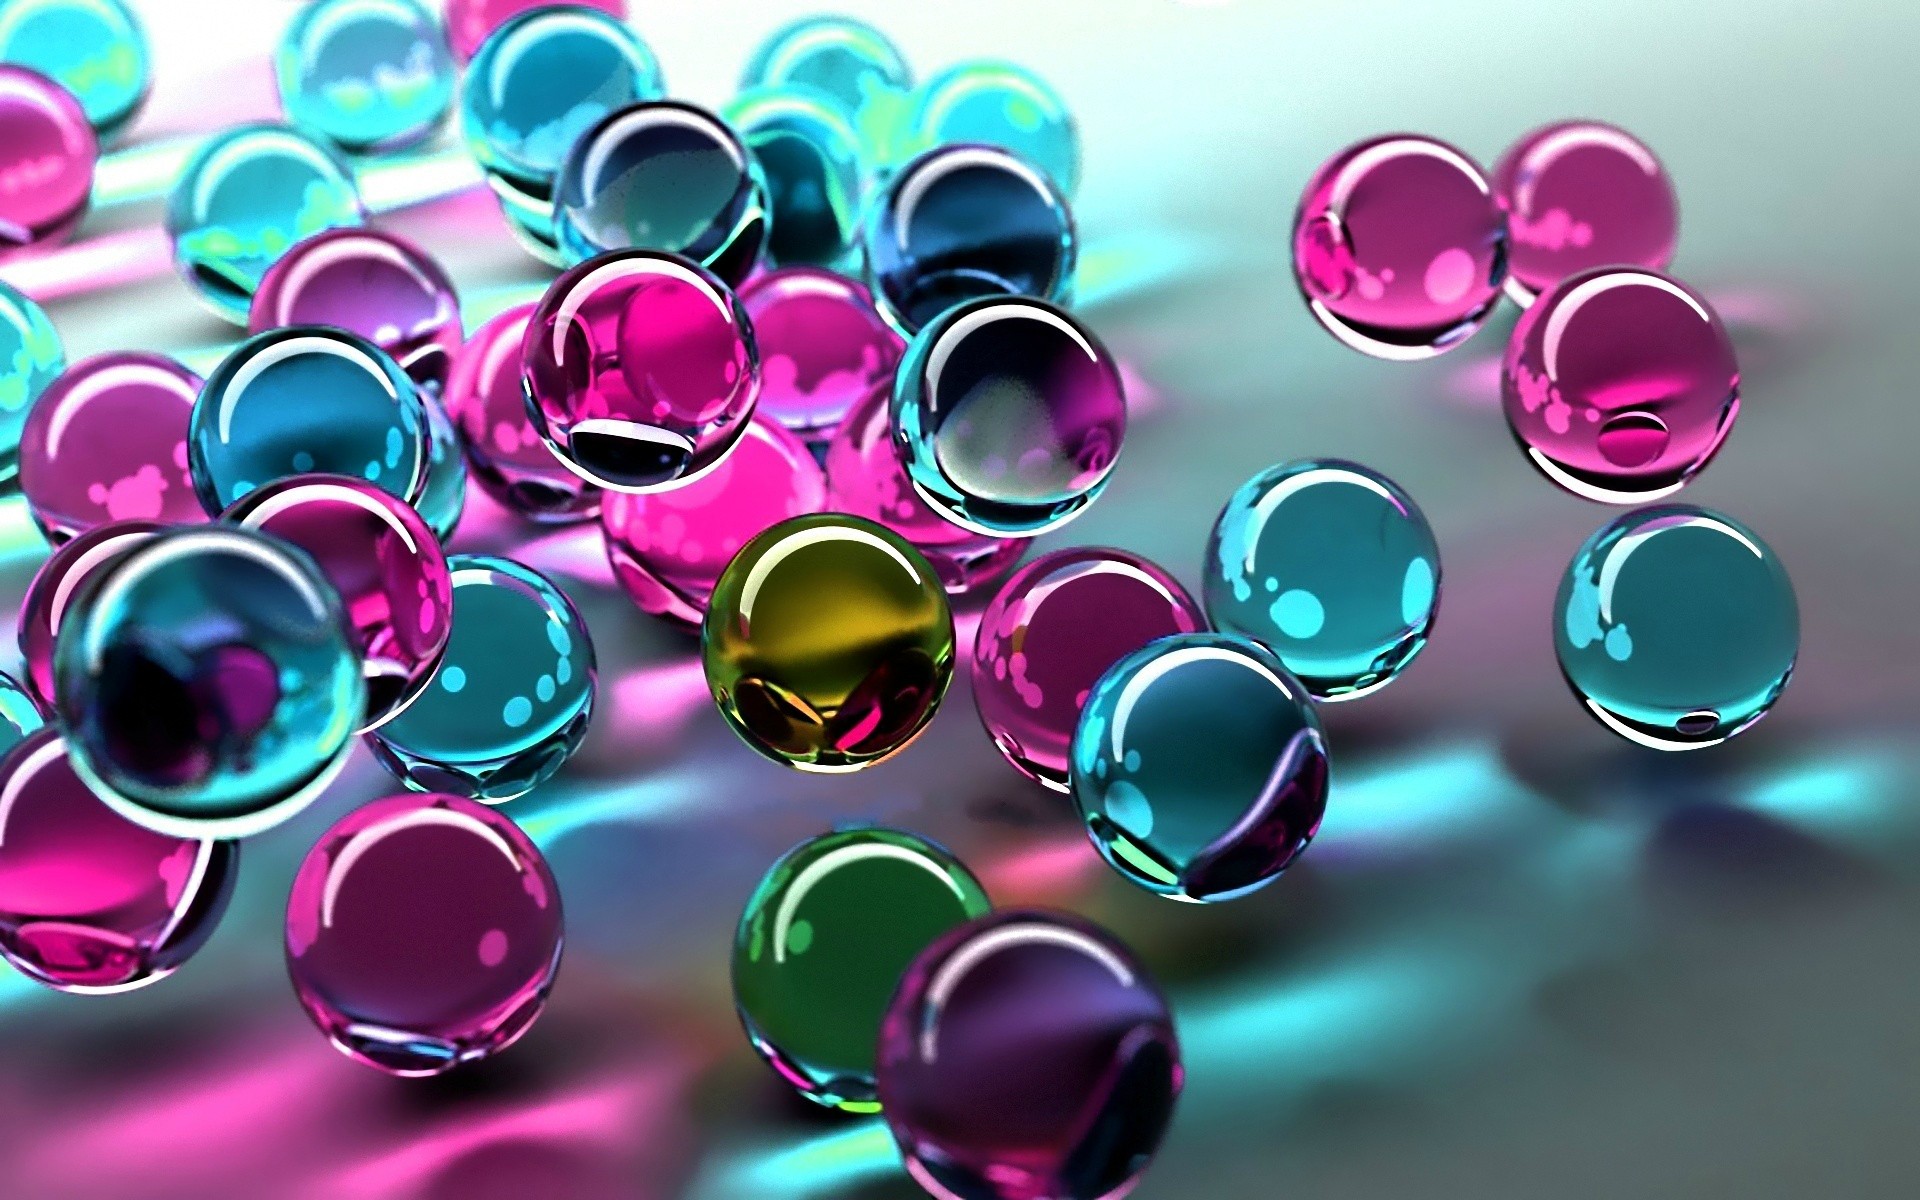 Many Marbles Colorful Wallpaper For Android Wallpaper - High Resolution Cool Abstract Backgrounds - HD Wallpaper 